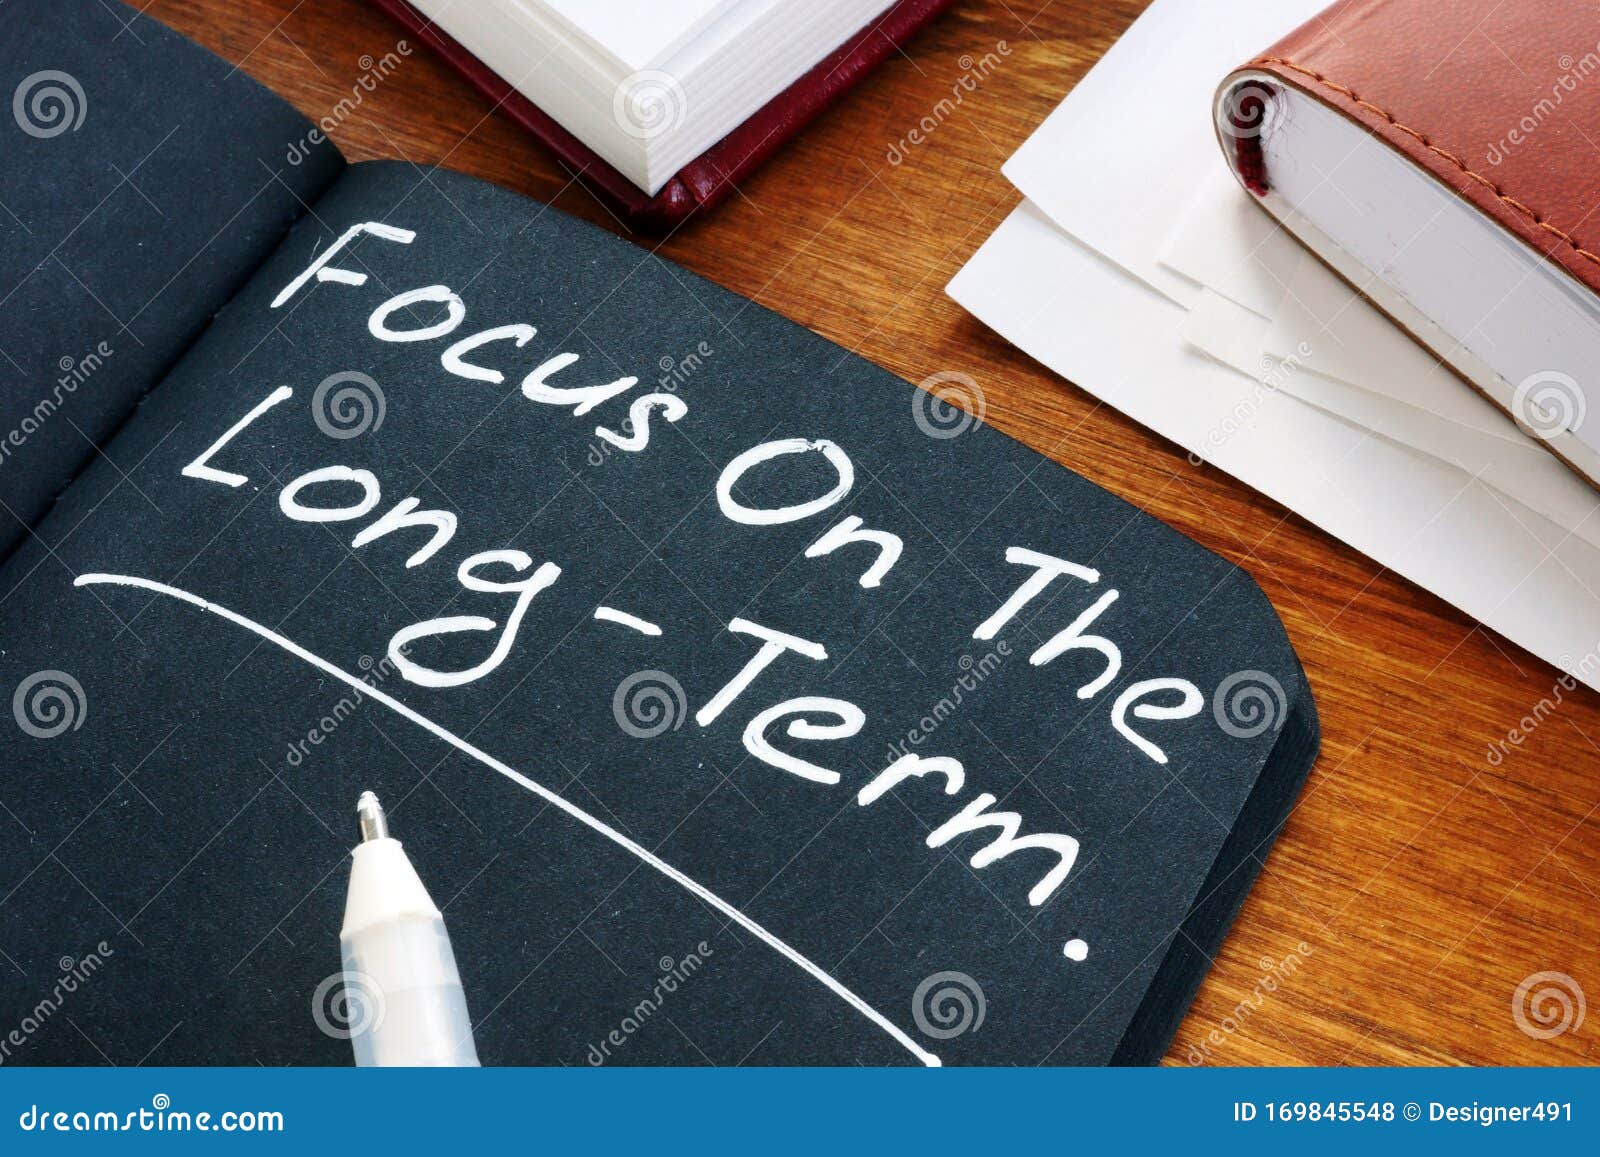 focus on the long term written on the page